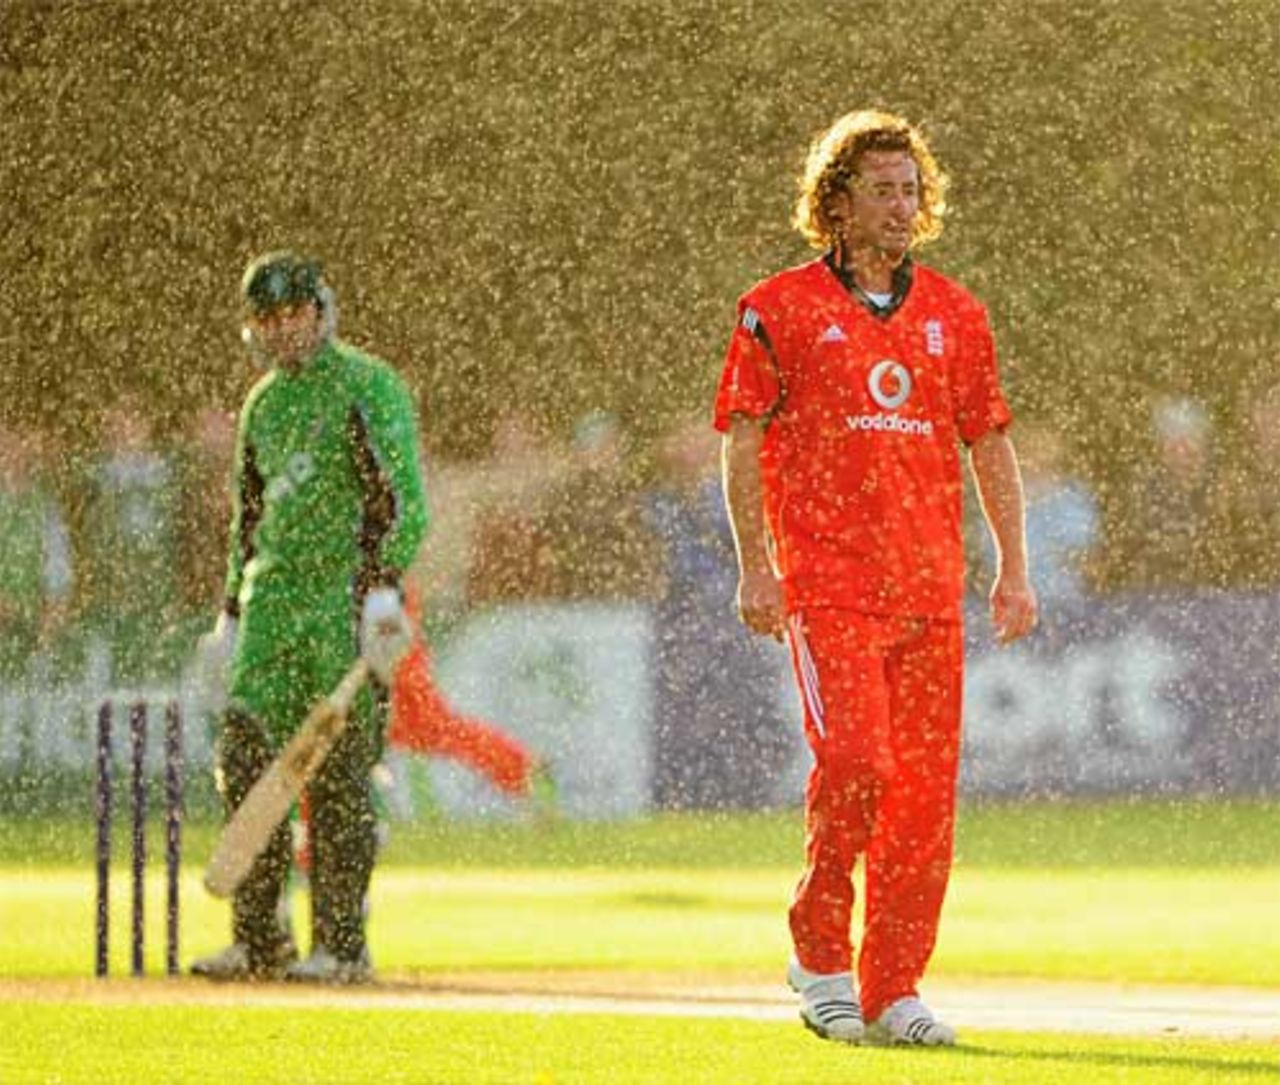 England had to battle some damp conditions, Ireland v England, Only ODI, Stormont, August 27, 2009